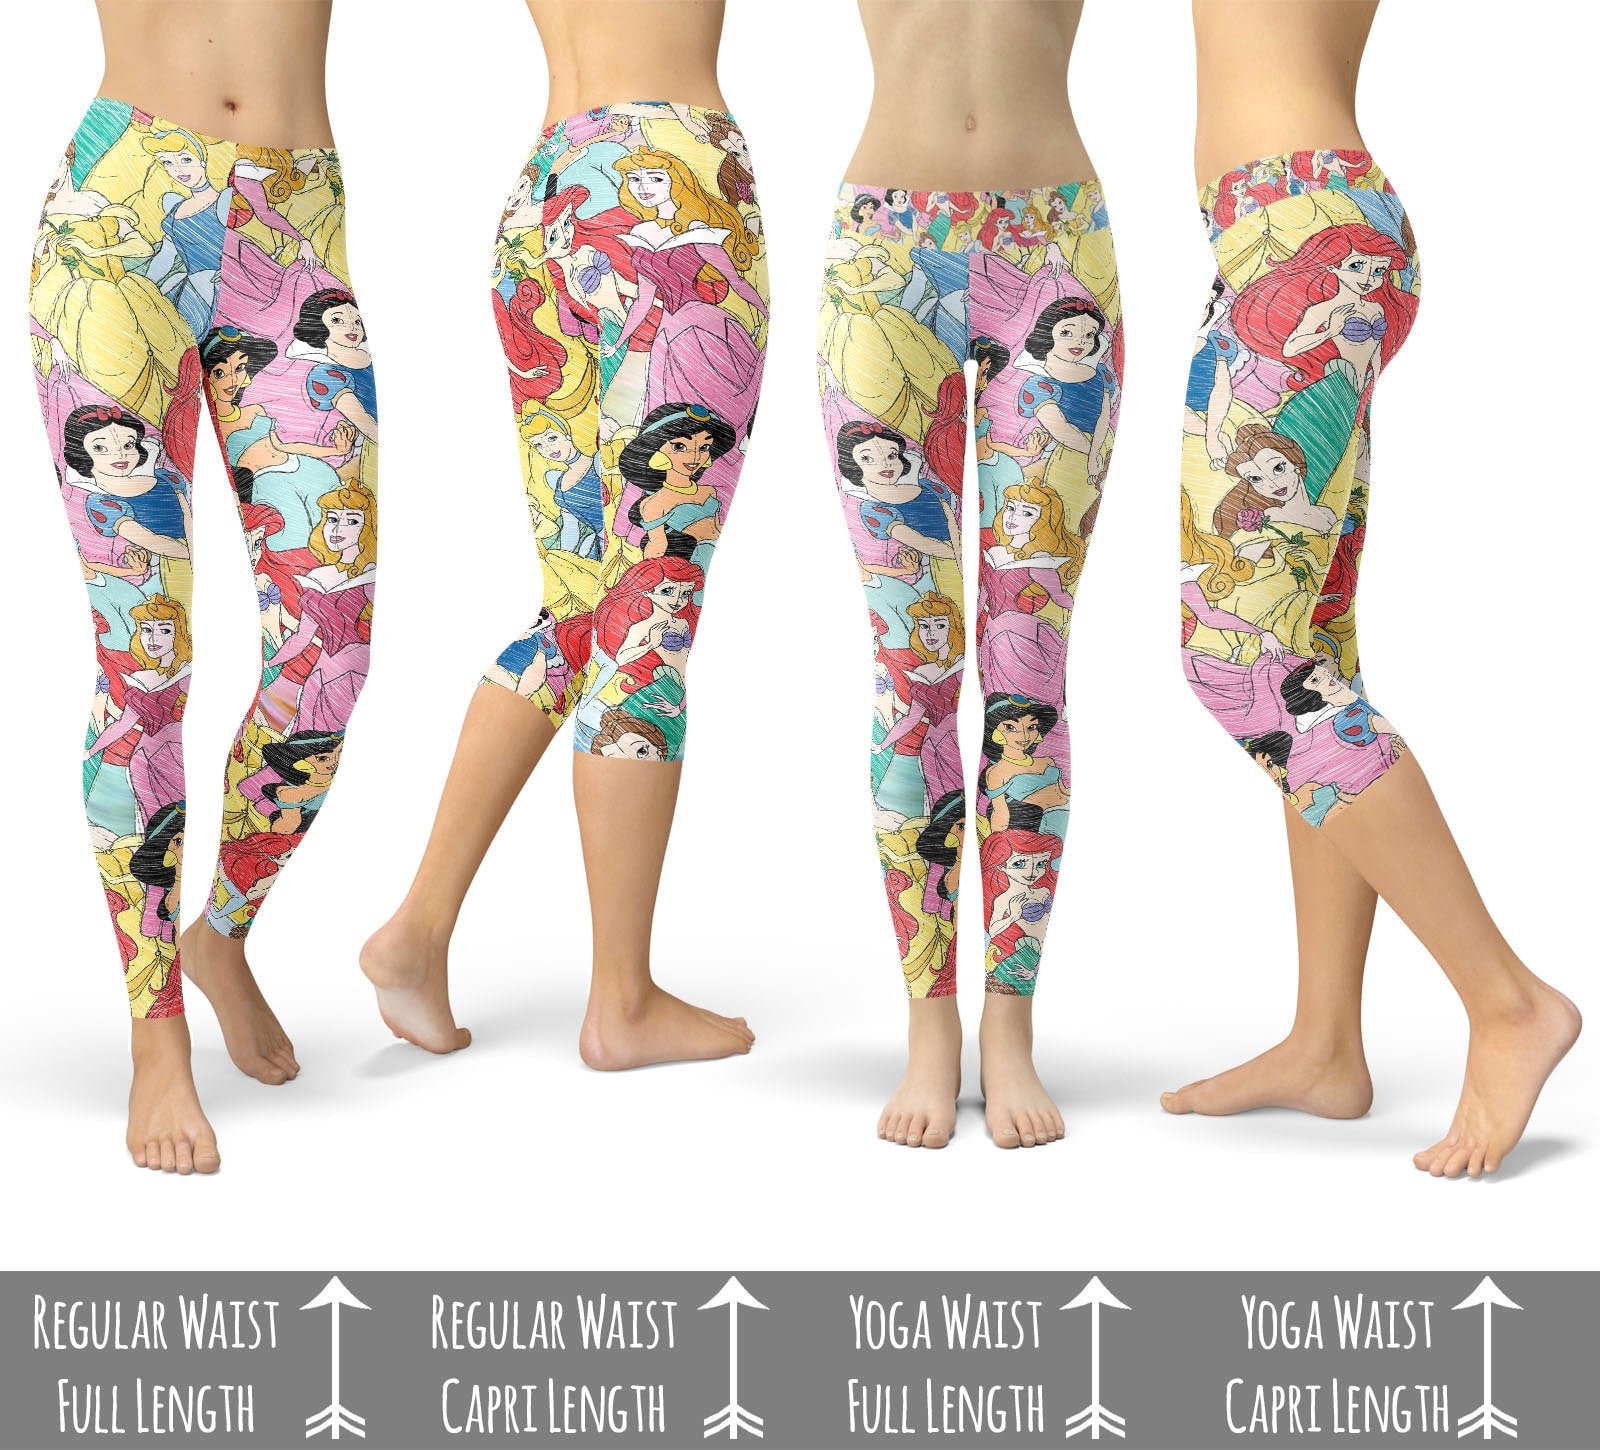 Princess Sketches Theme Park Inspired Leggings in Capri or Full Length, Sports  Yoga Winter Styles in Sizes XS 5XL 